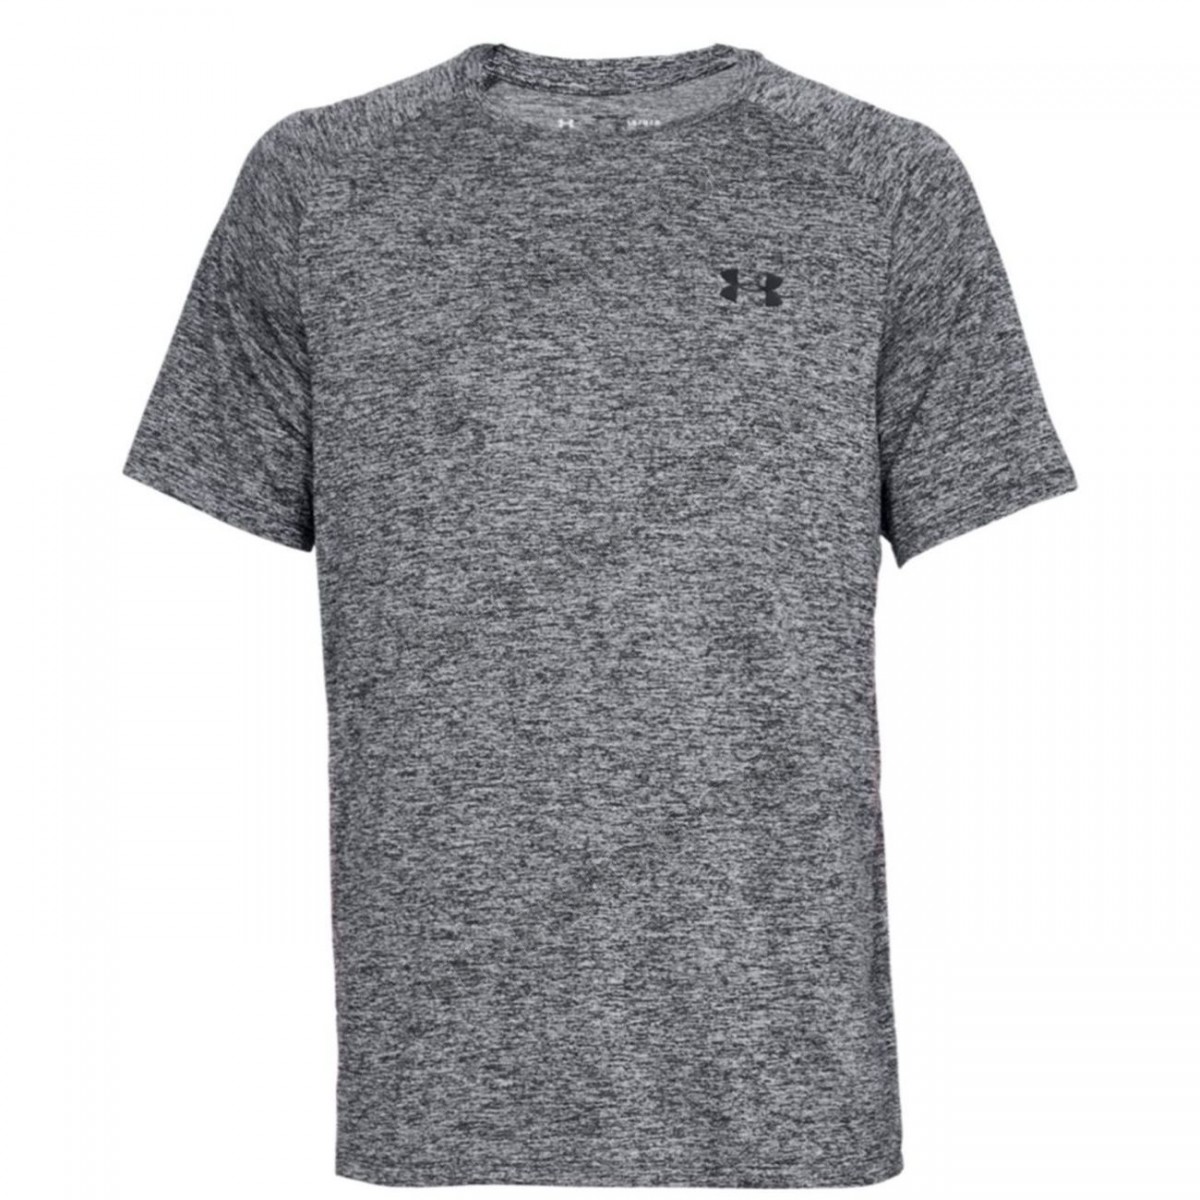 Under Armour/running adulte UNDER ARMOUR Maillot running manches courtes - Homme - UA005 - gris √ Nouveau style √ Soldes - -2